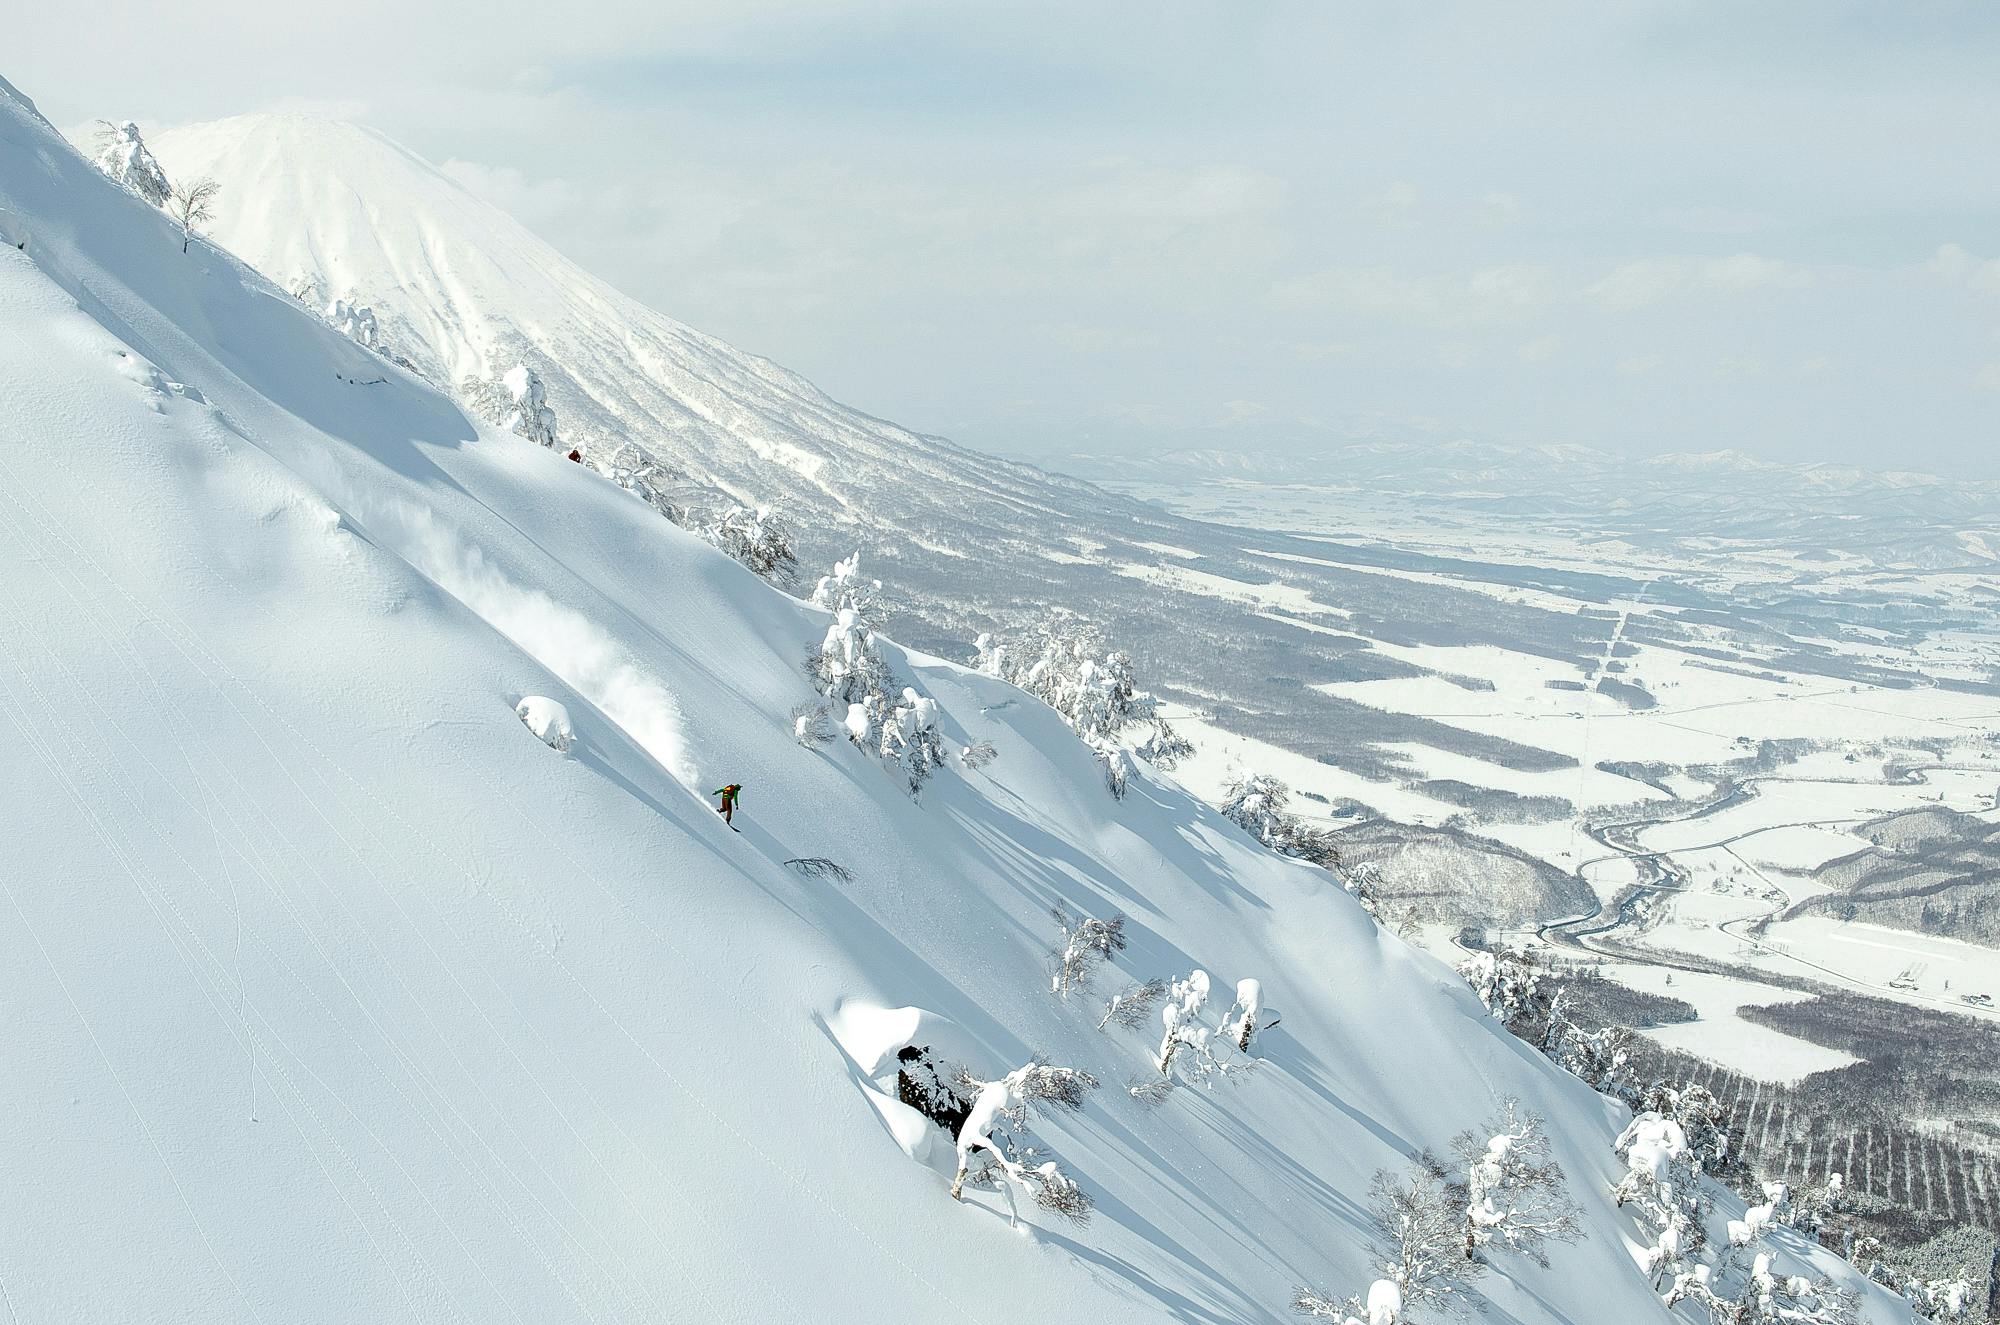 A snowboarders slides down a mountain covered with snow and a Japanese volcano observes in the background.